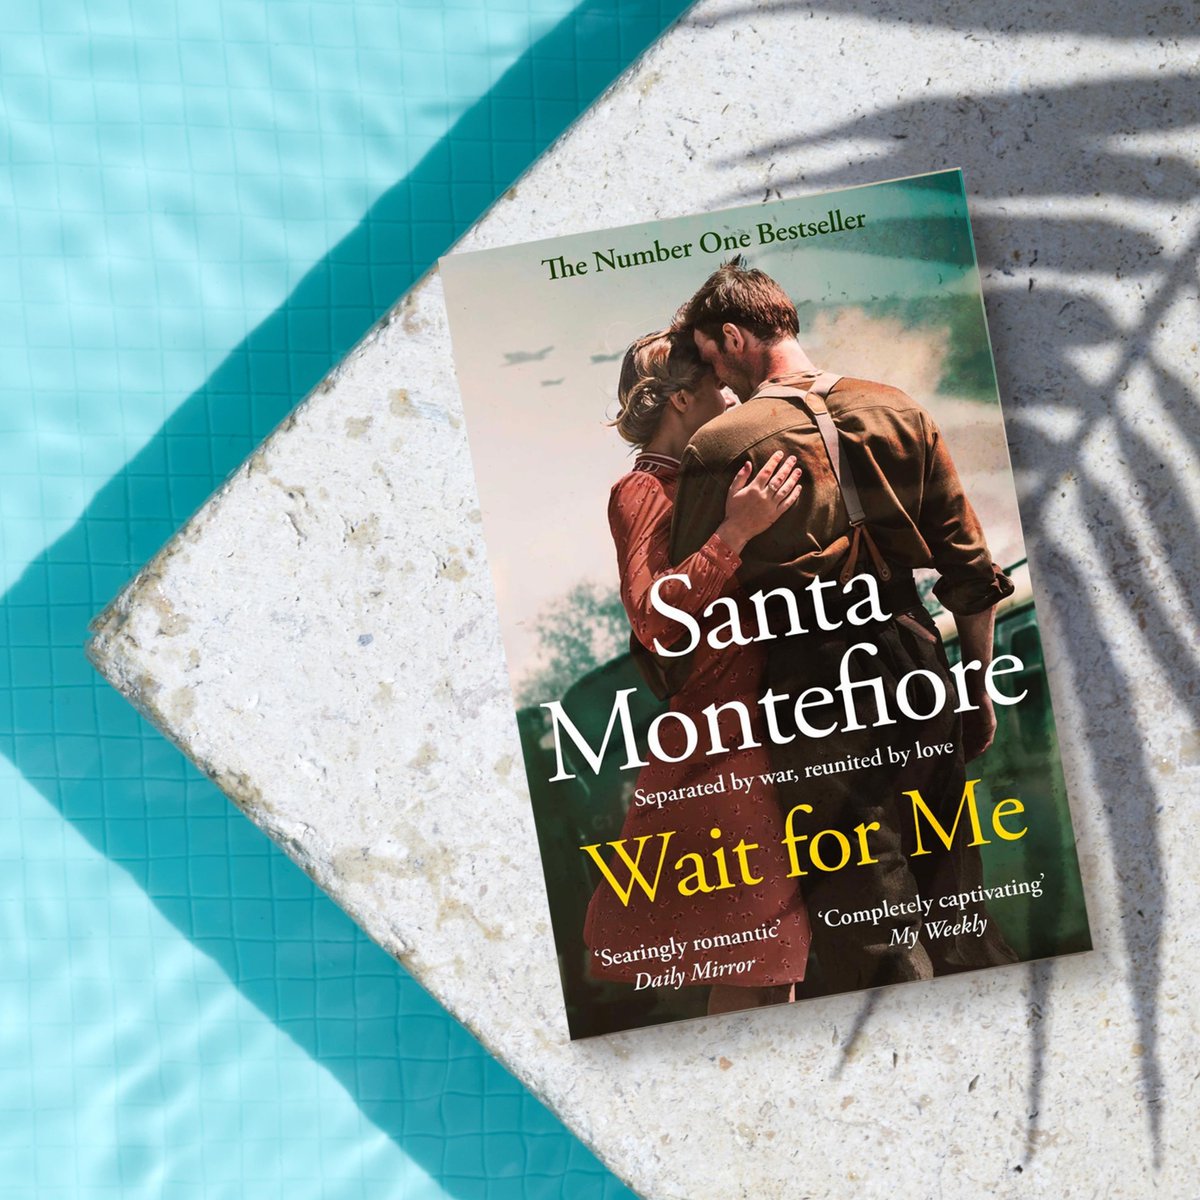 Doing a Big 4 Supermarket Shop this weekend? Don't forget to pop to the book aisle and grab a copy of the stunning paperback edition of Sunday Times bestseller @SantaMontefiore's emotional new novel of enduring love and devastating secrets, #WaitForMe! simonandschuster.co.uk/books/Wait-for…